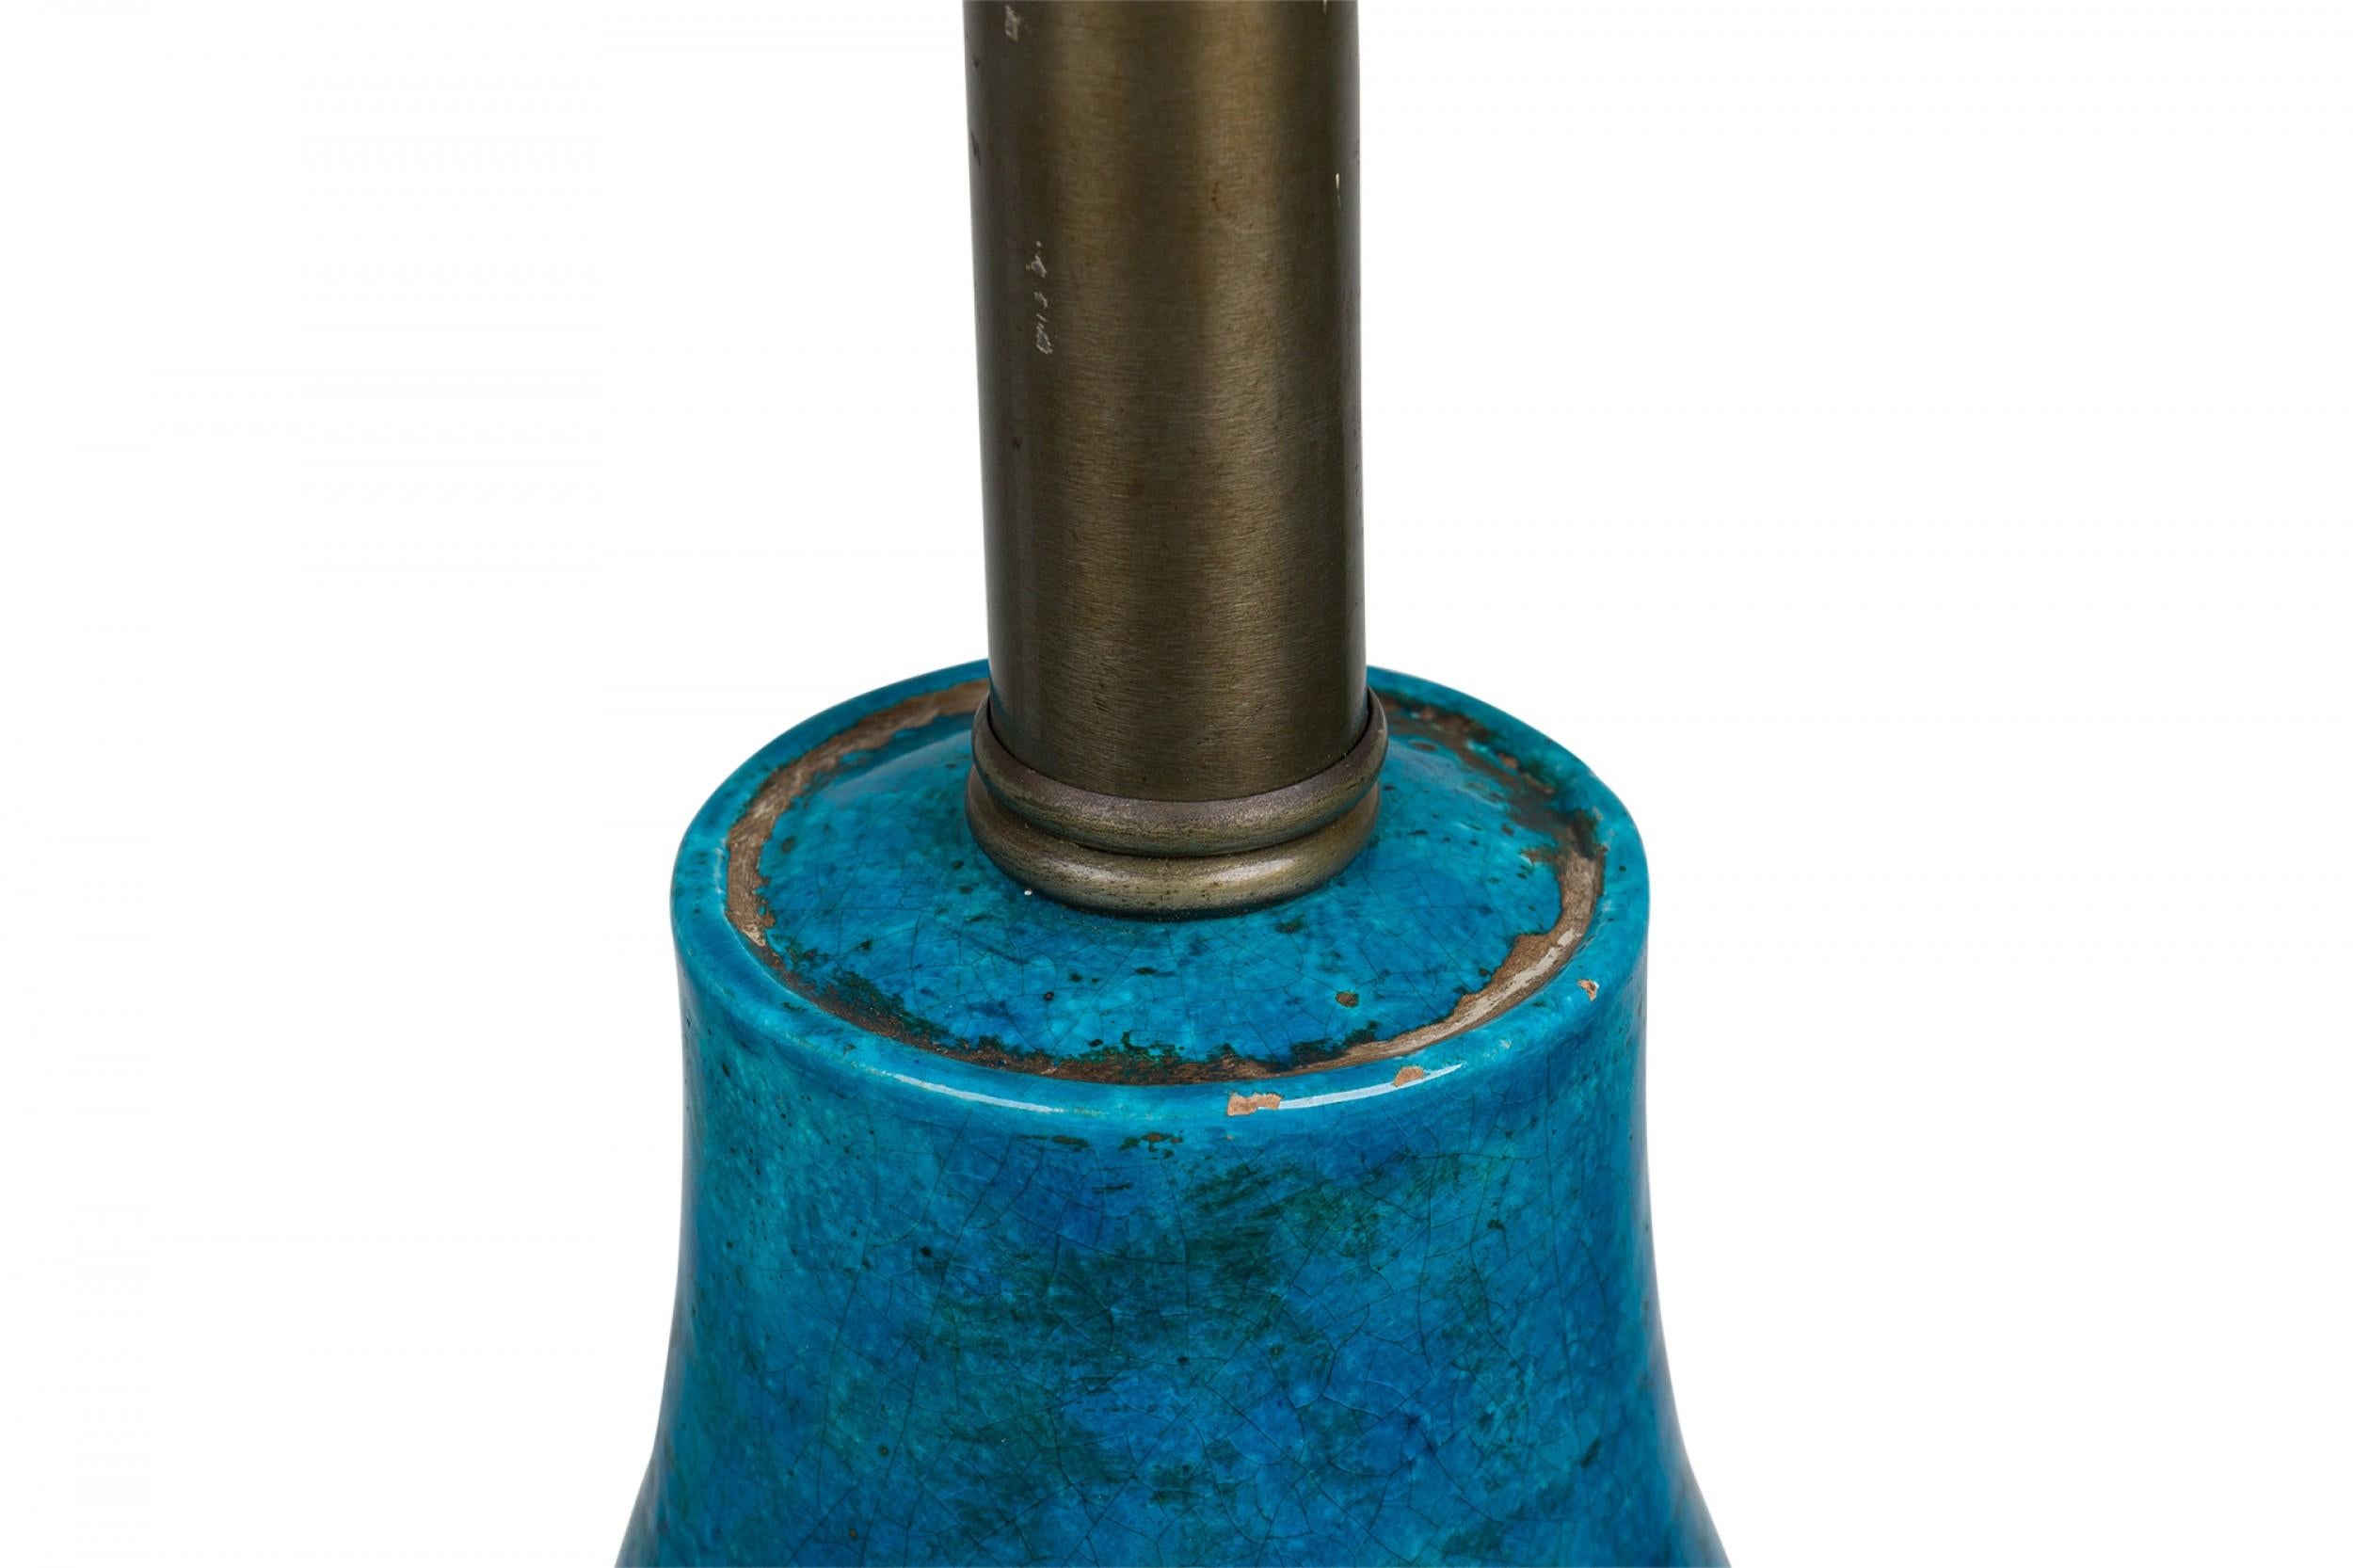 Mid-Century Italian ceramic table lamp in ovoid form with a tapered neck leading to a brushed pewter metal stem and functioning cupped light switch socket, the body incised with three decorative rows of banding and fired in a vivid turquoise /  blue